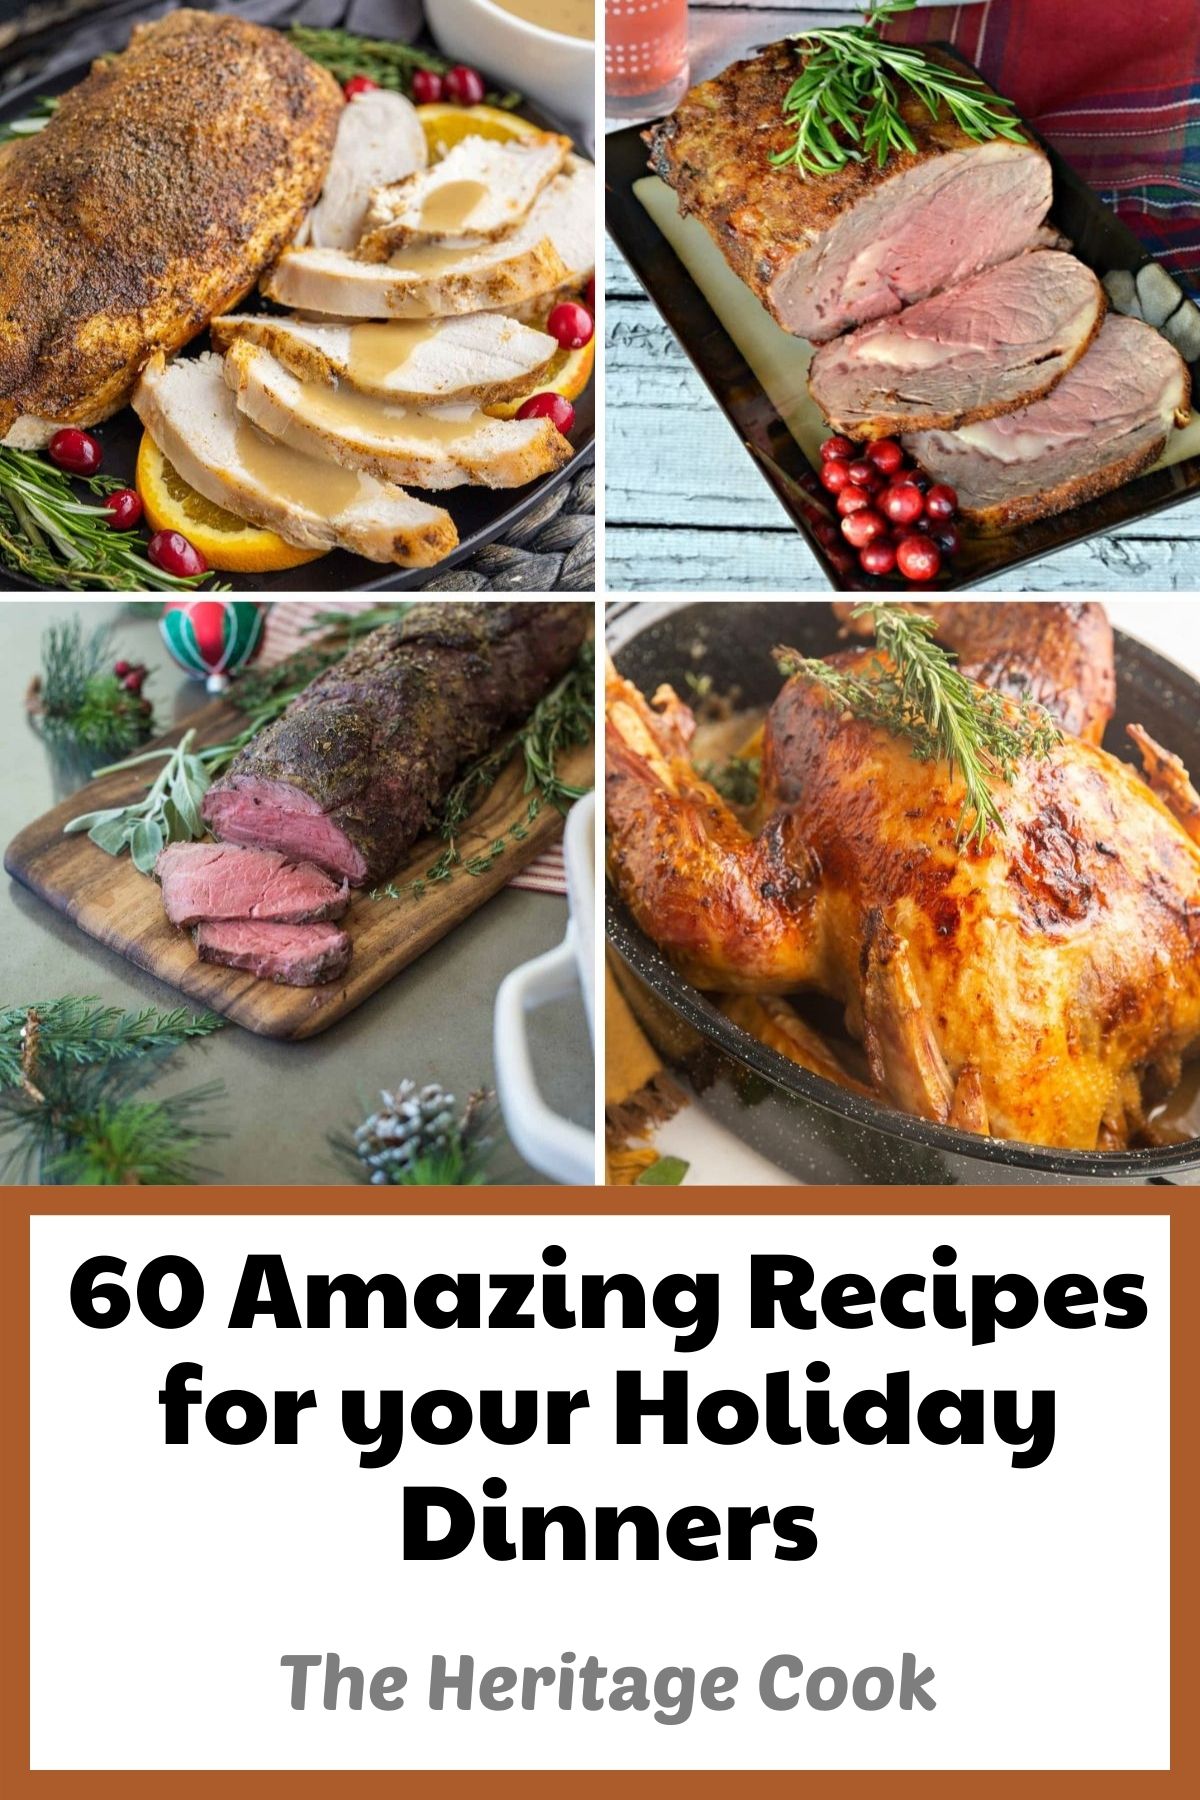 Collection of 60 Amazing Recipes for Your Holiday Dinners compiled by Jane Bonacci, The Heritage Cook.